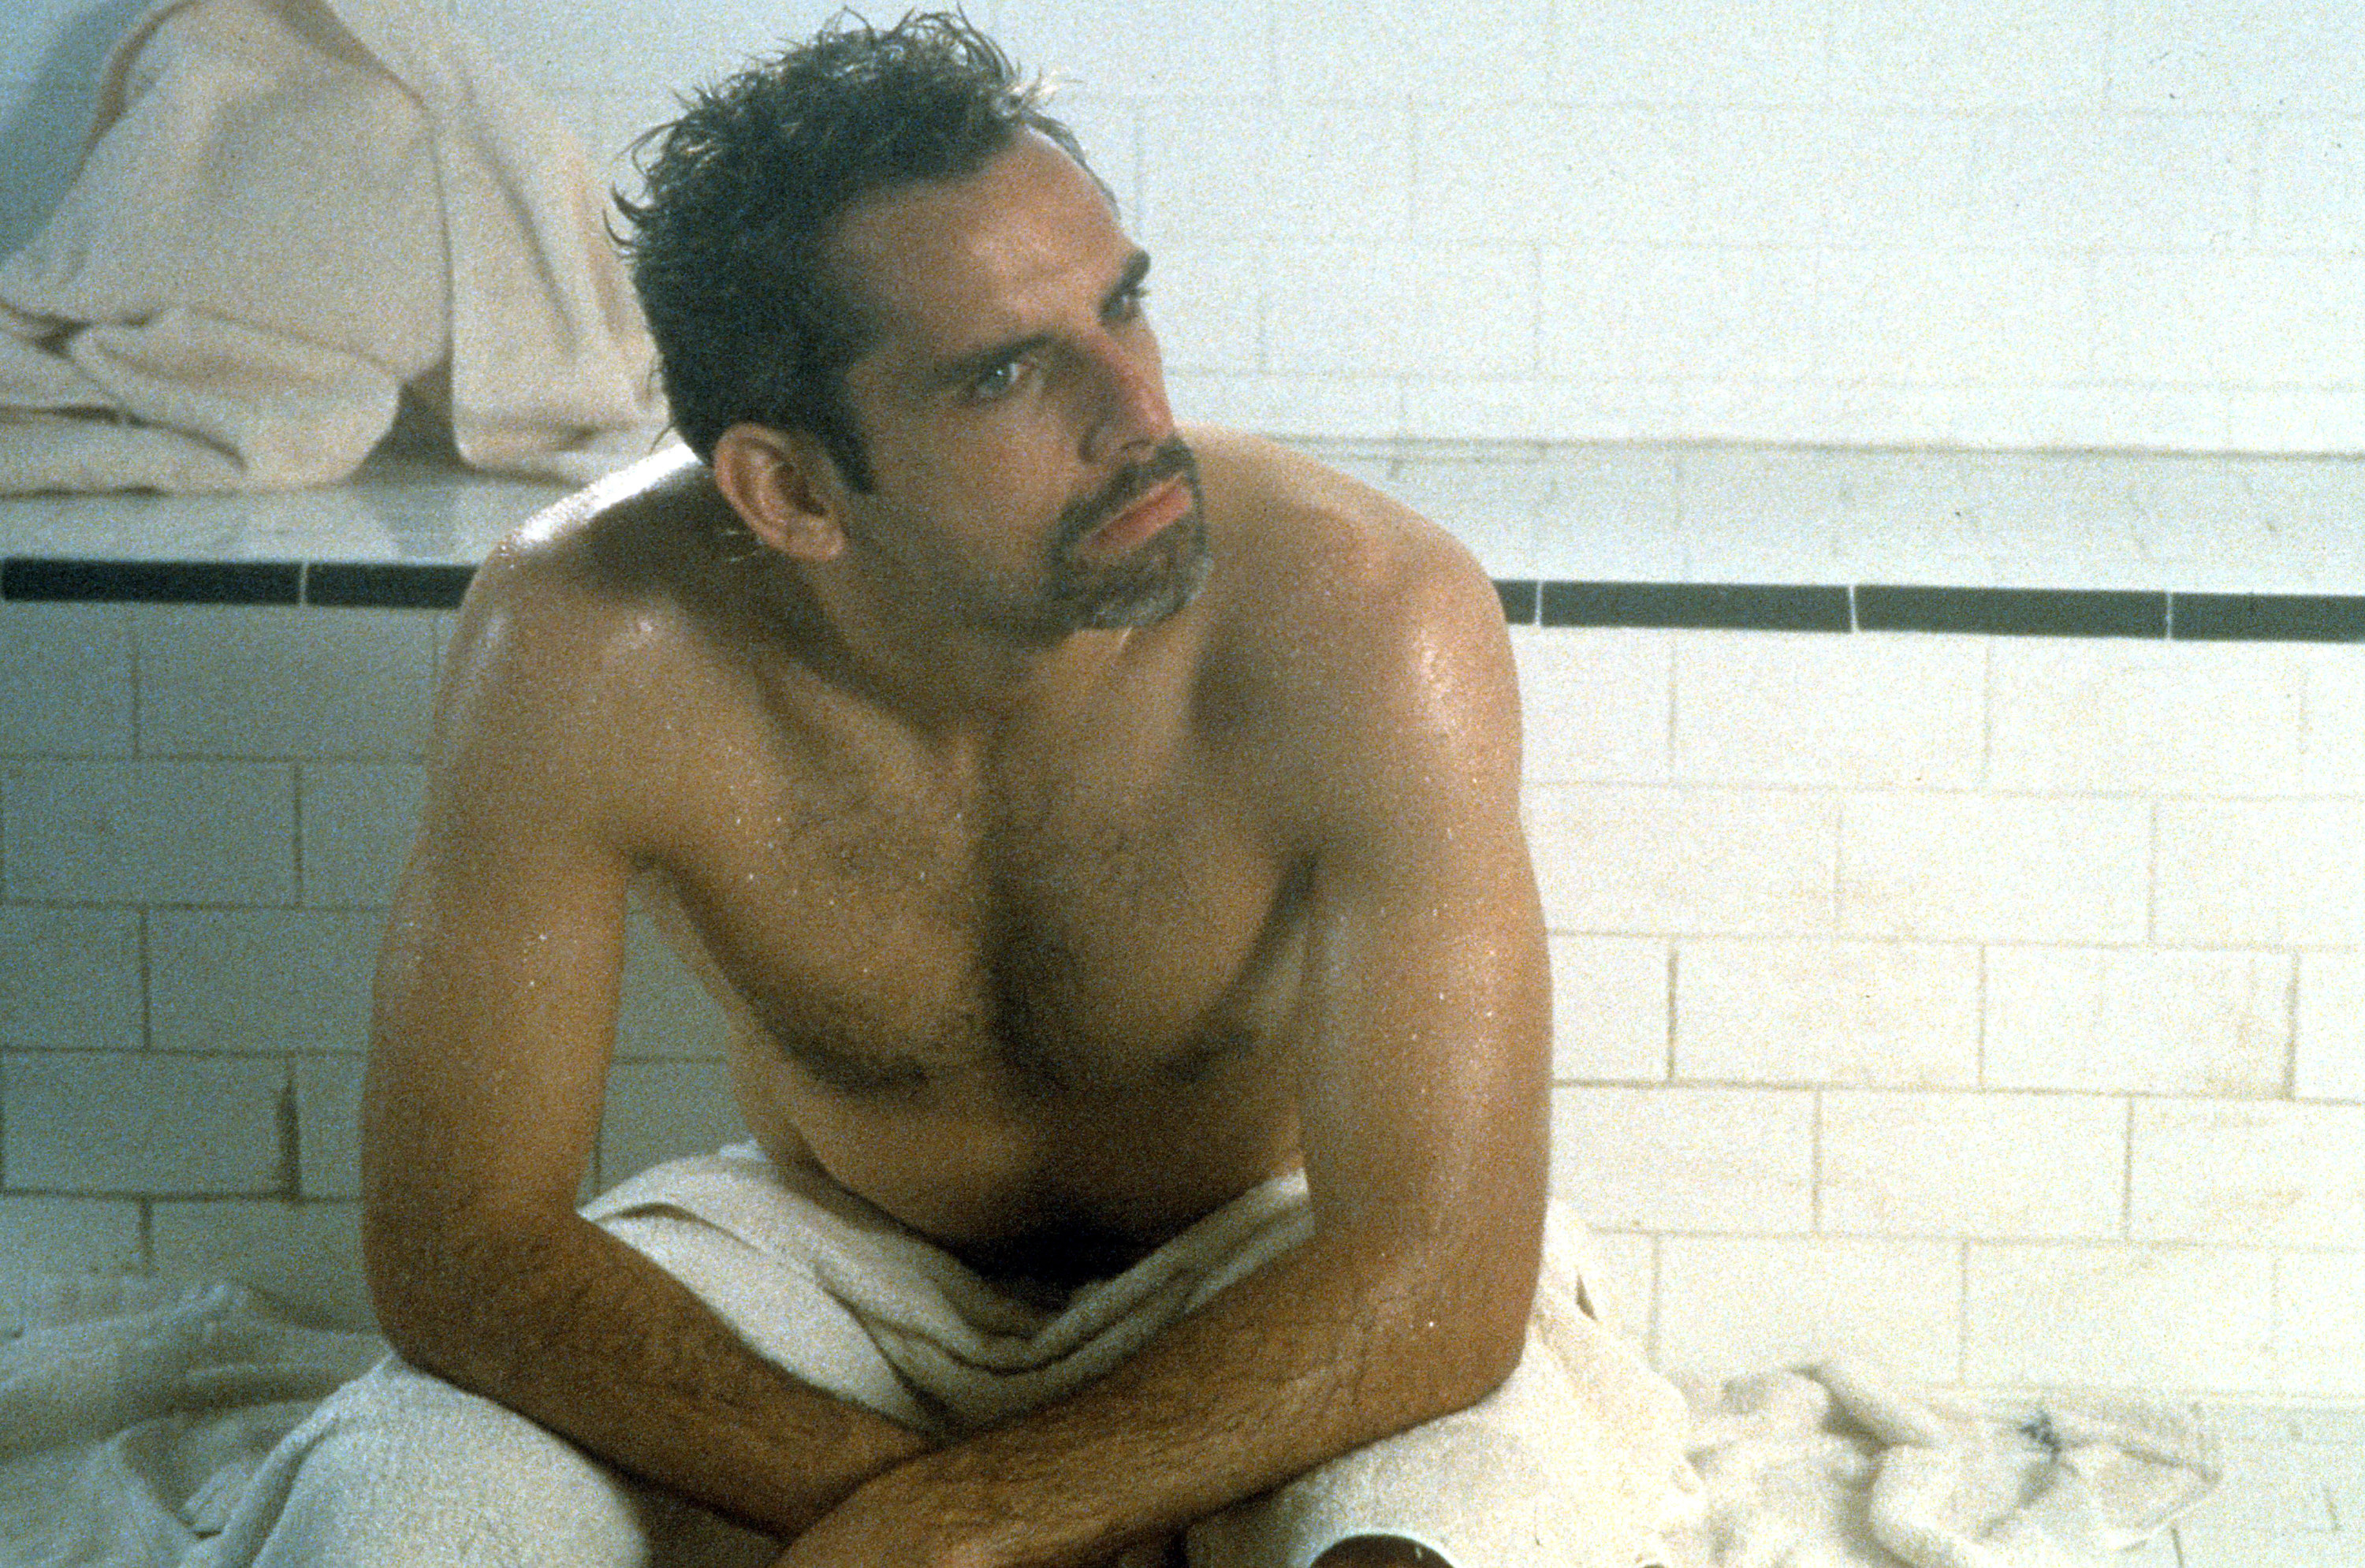 Ben Stiller sitting in a sauna in a scene from the film &#x27;Your Friends &amp; Neighbors&#x27;, 1998